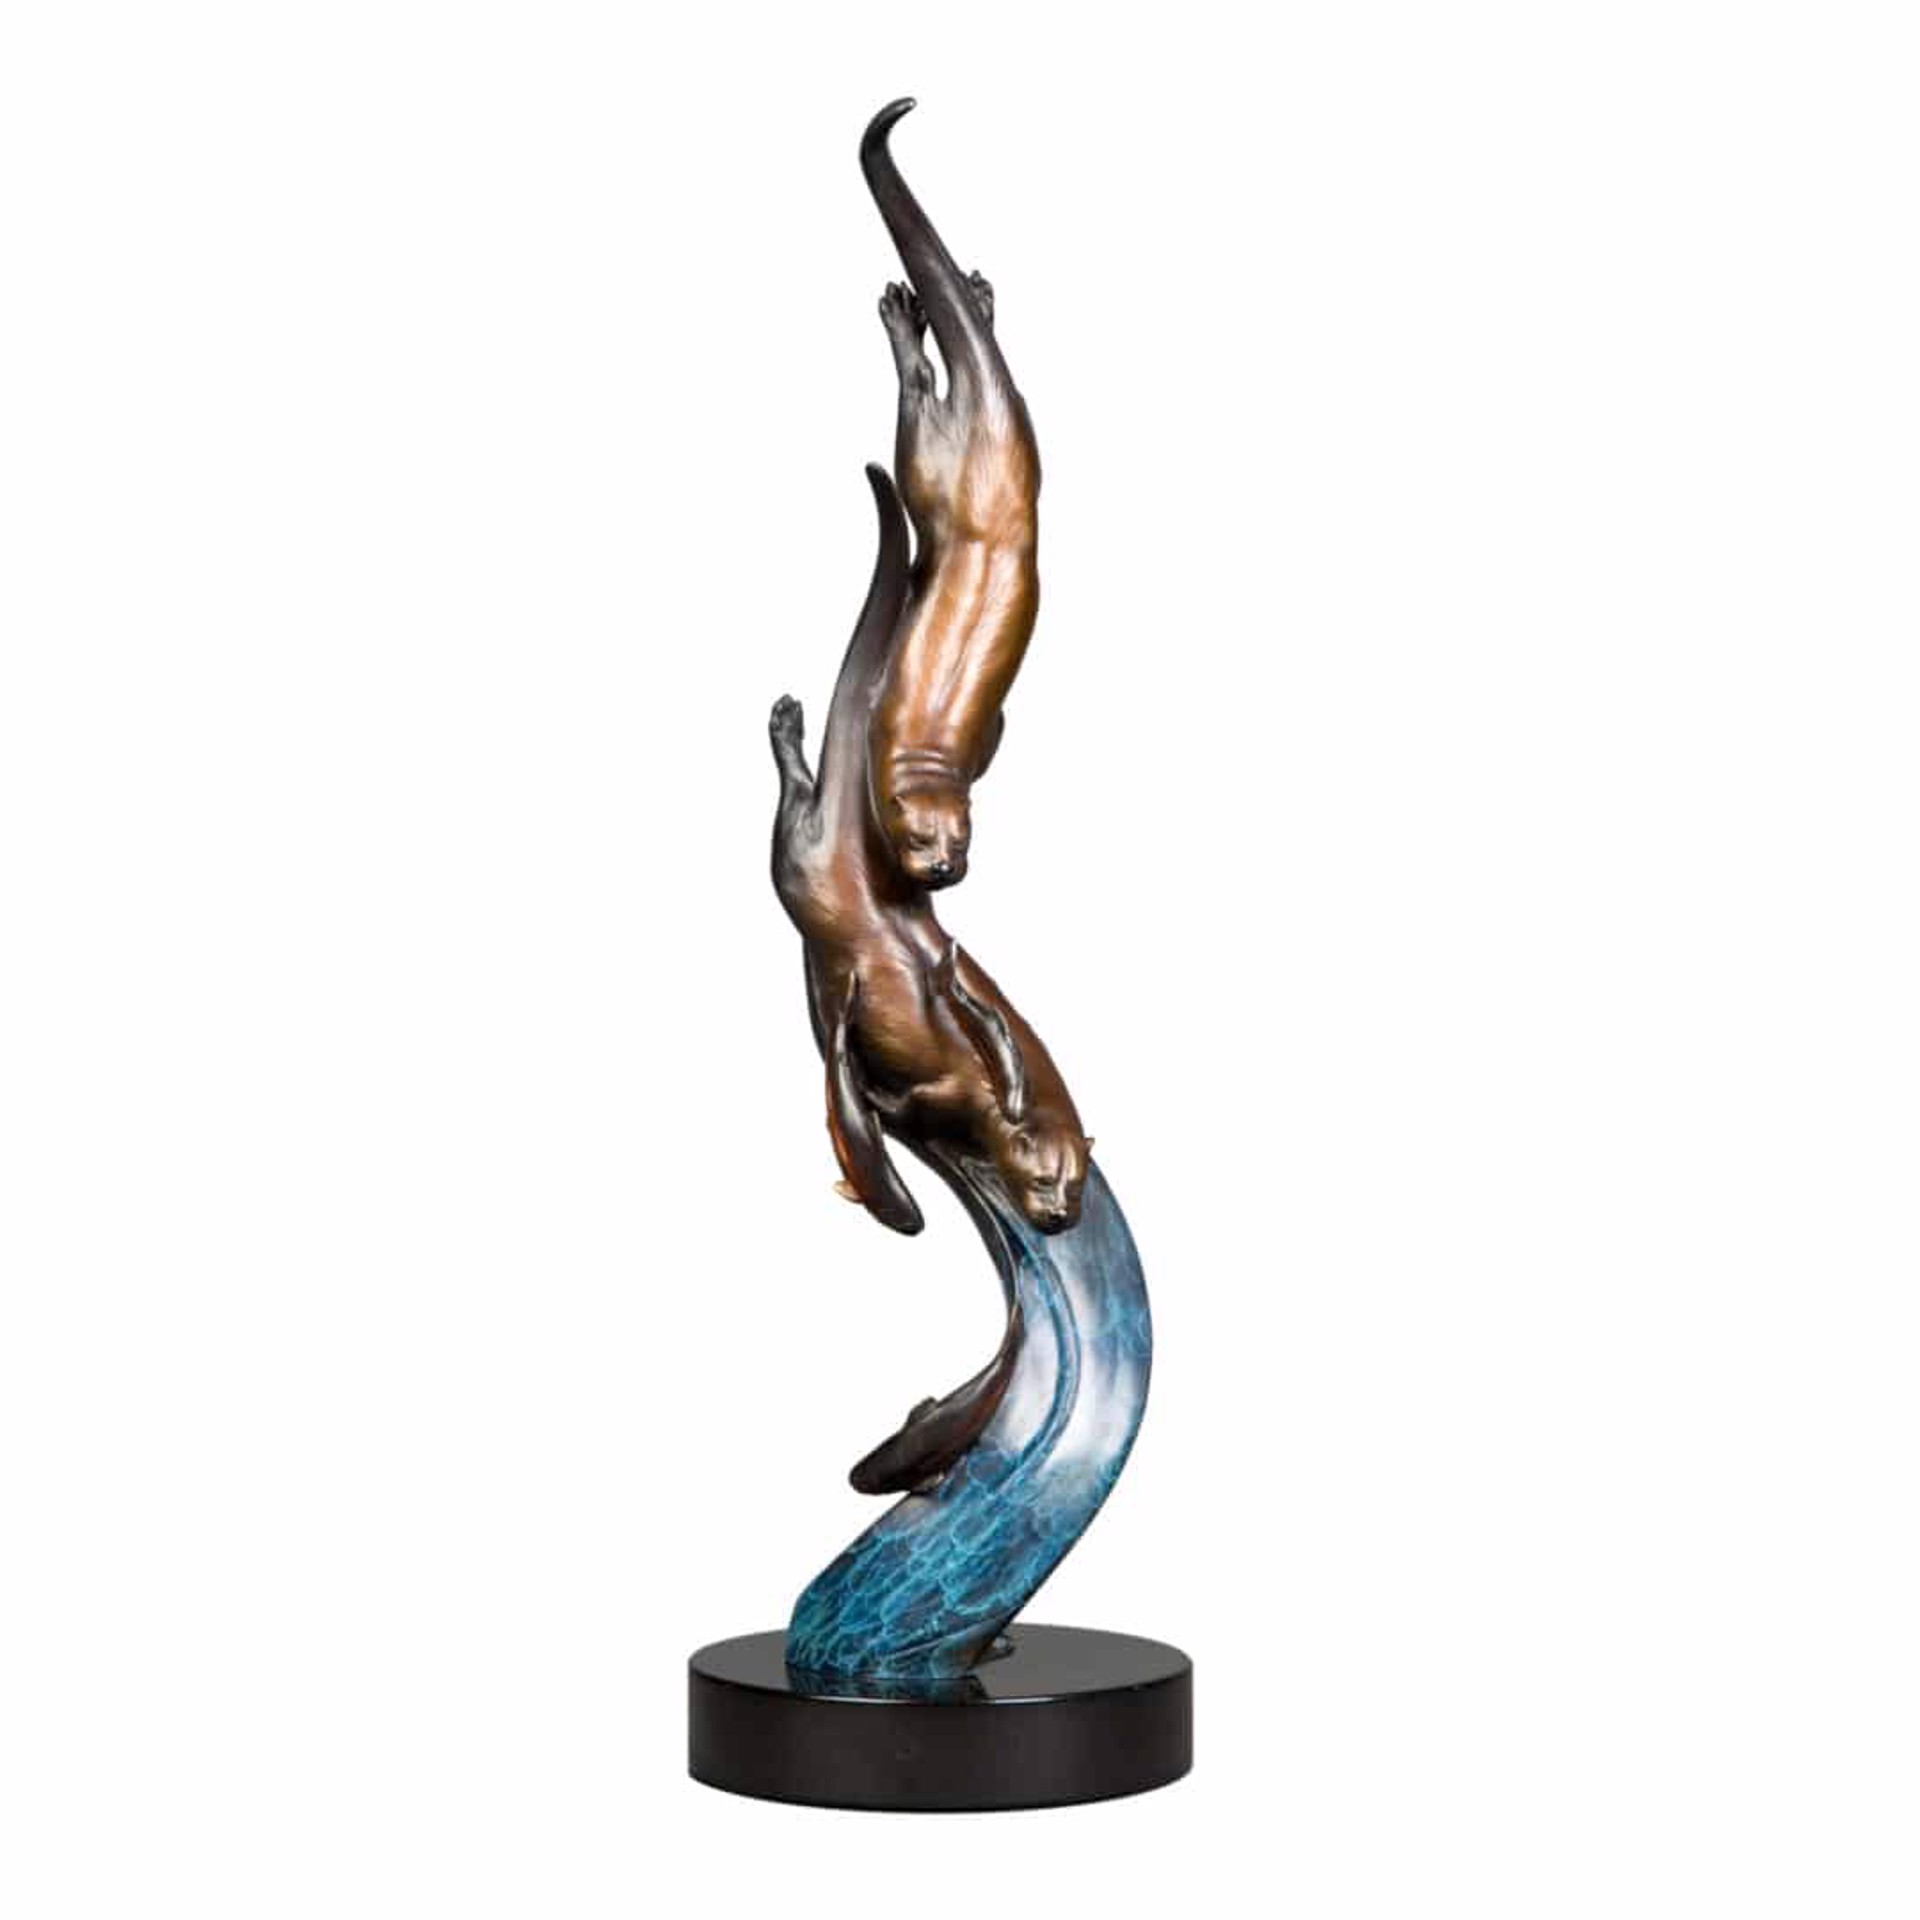 Otter Chasing Fish Original Bronze Sculpture by Rip and Alison Caswell, Contemporary Fine Art, Modern Wildlife Art, Available At Gallery Wild